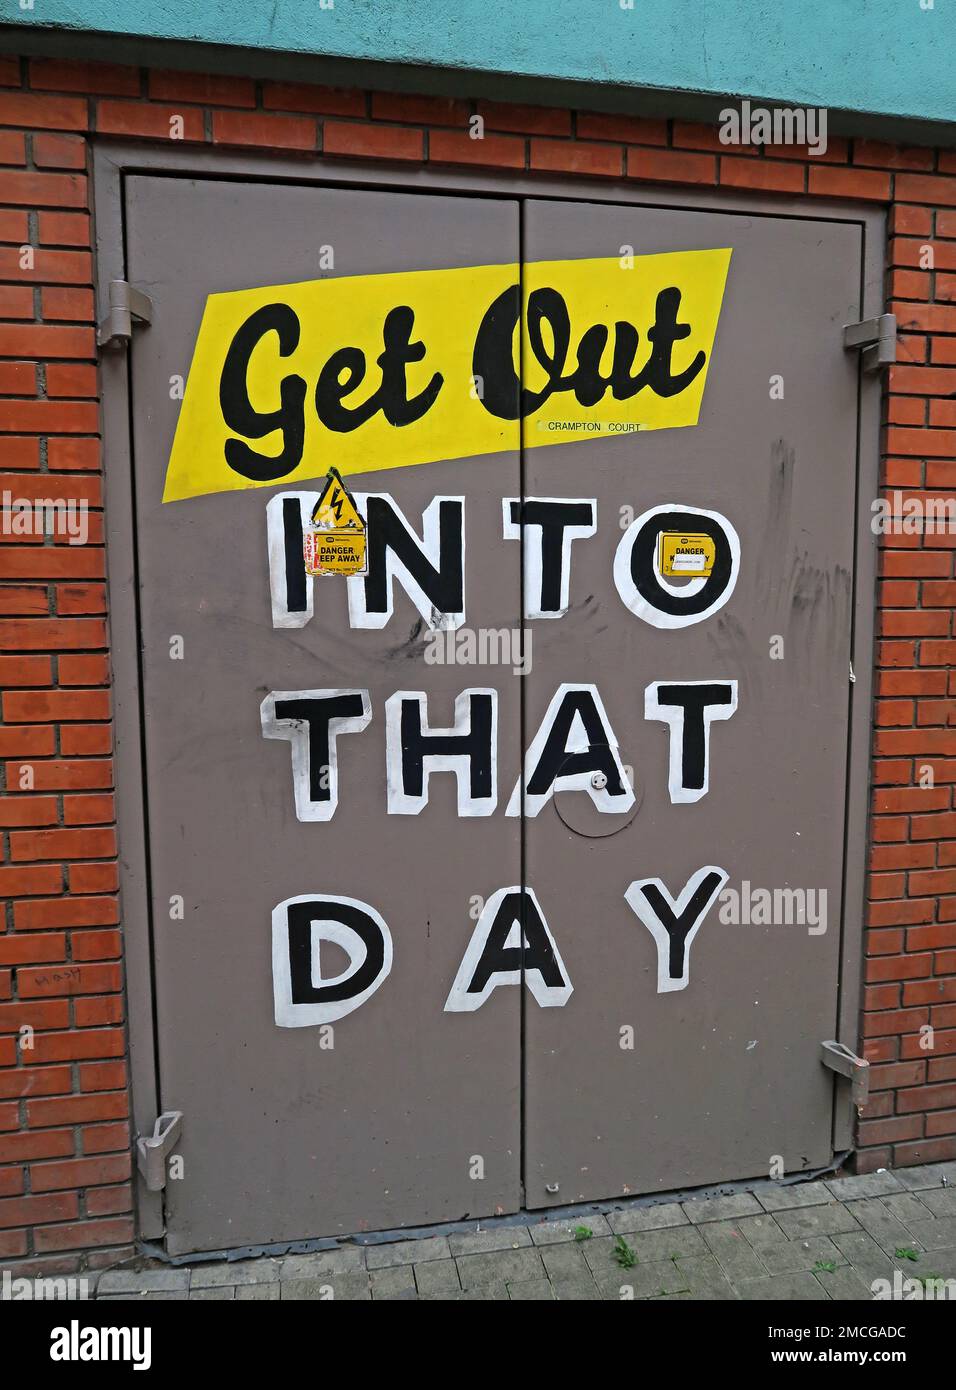 Graffiti on exit fire door - Get out into that day - Dublin Stock Photo